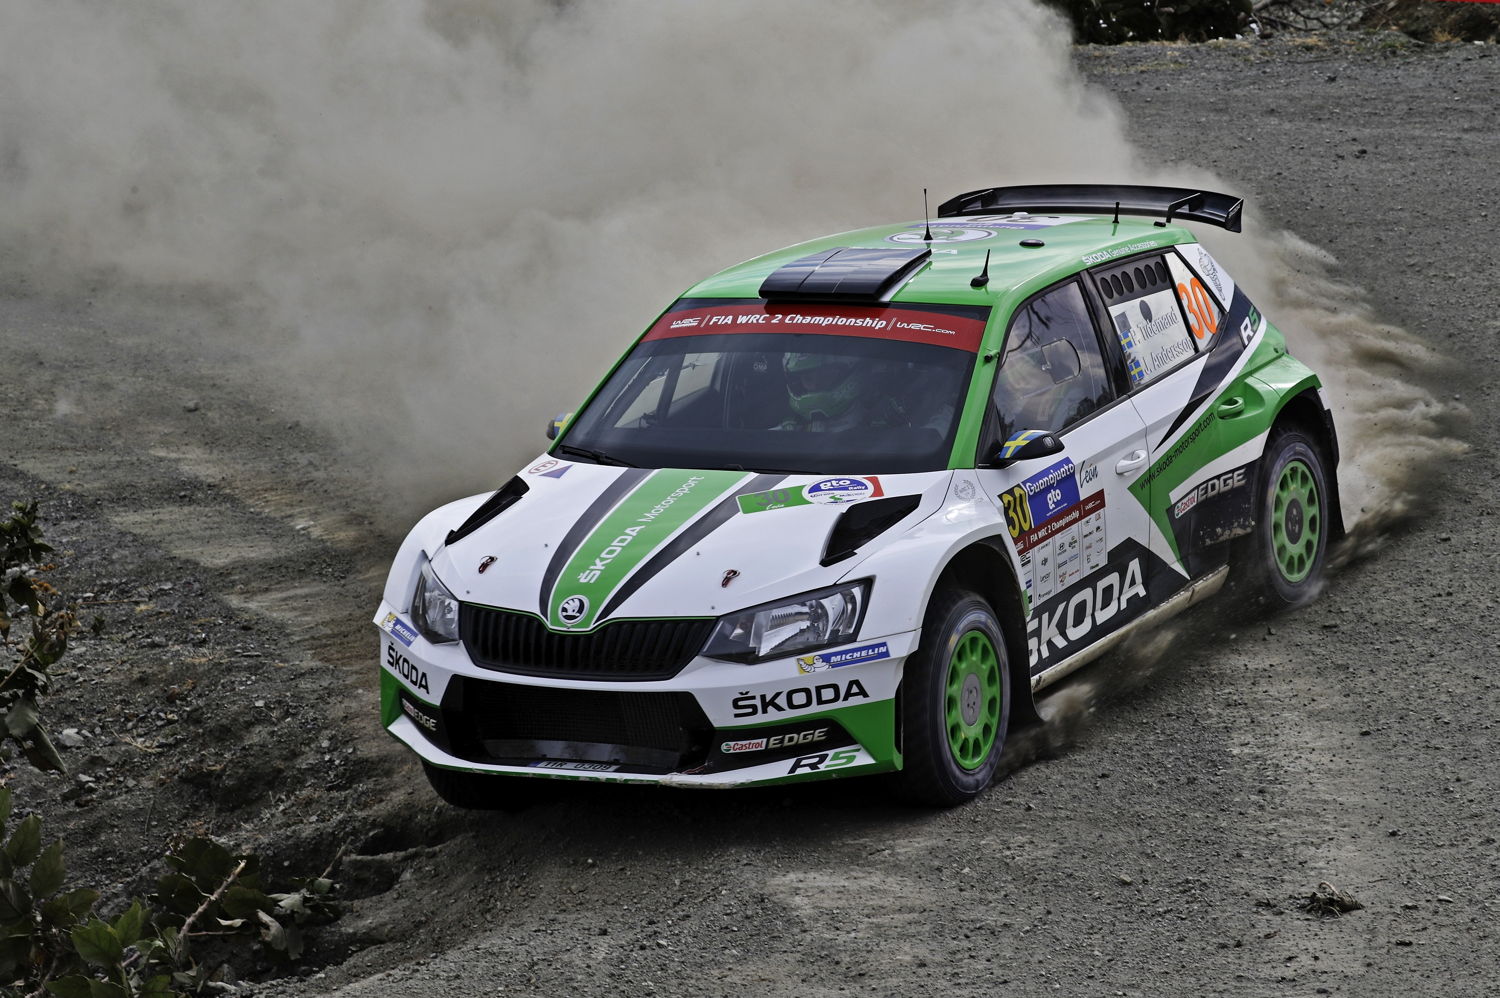 Pontus Tidemand and co-driver Jonas Andersson in the ŠKODA FABIA R5 are the favourites to win the WRC 2 on Argentine gravel.